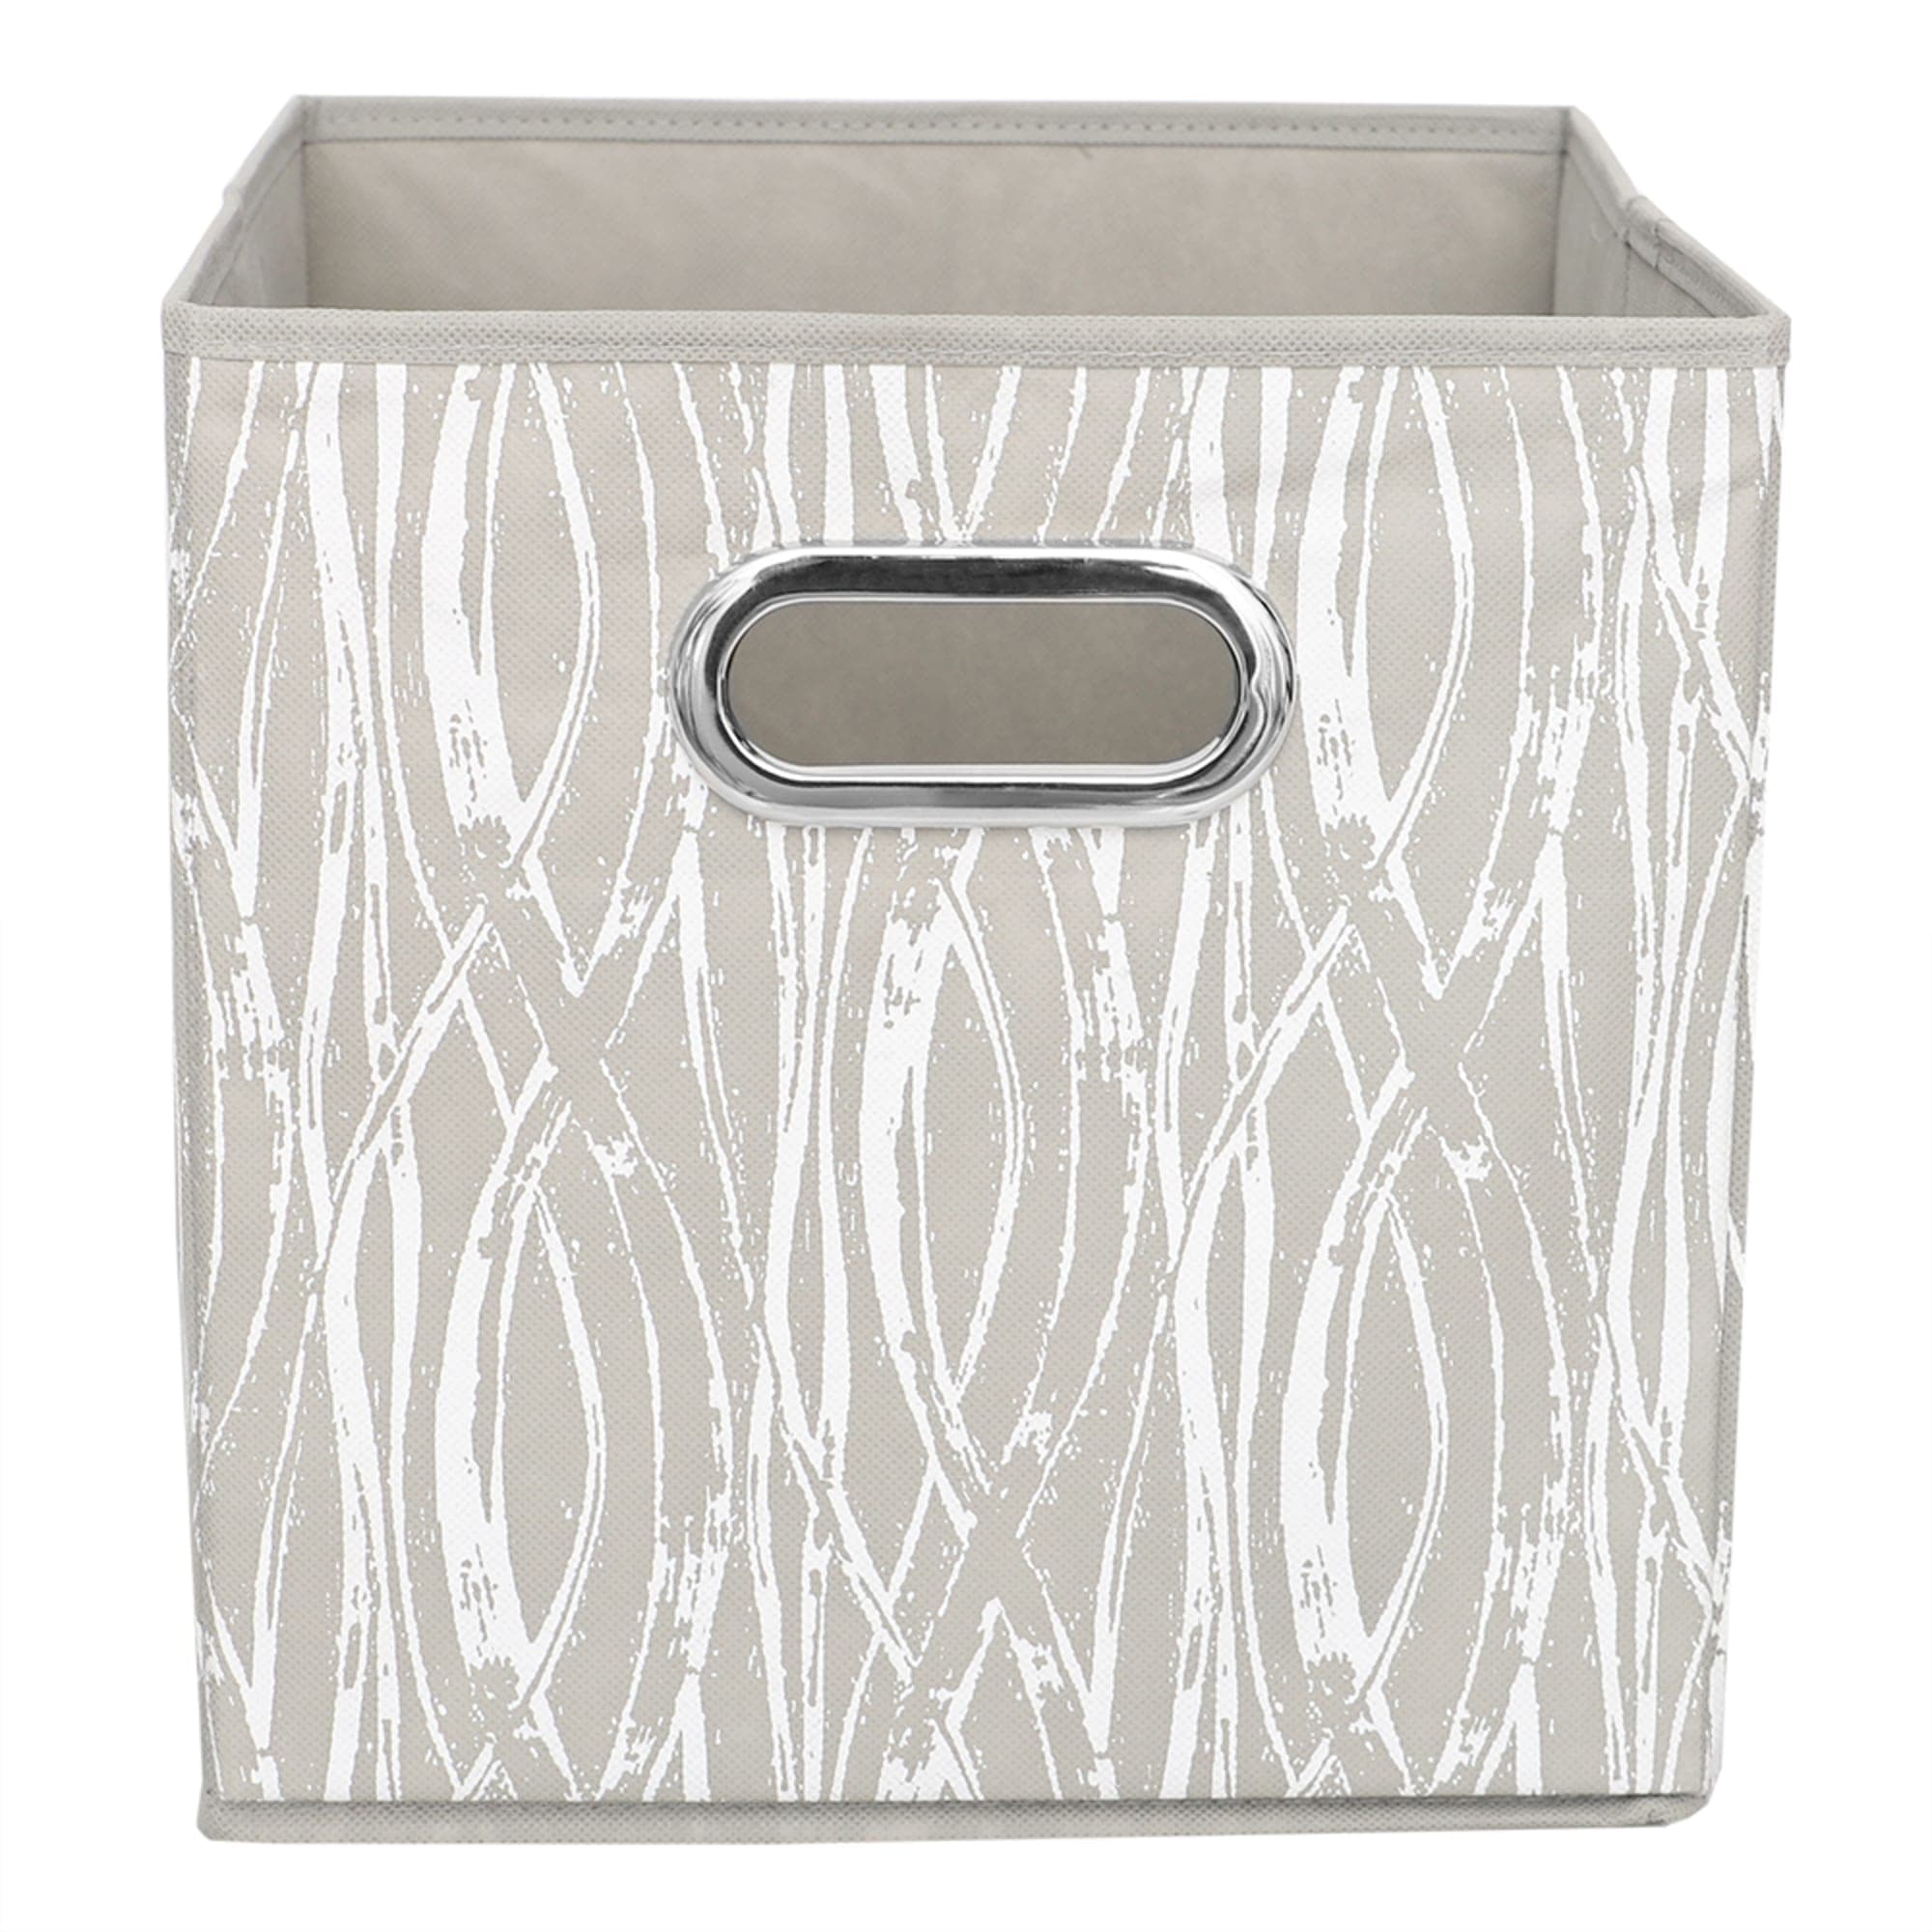 Home Basics Weave Collapsible Non-Woven Storage Bin with Grommet Handle, Taupe $5.00 EACH, CASE PACK OF 12